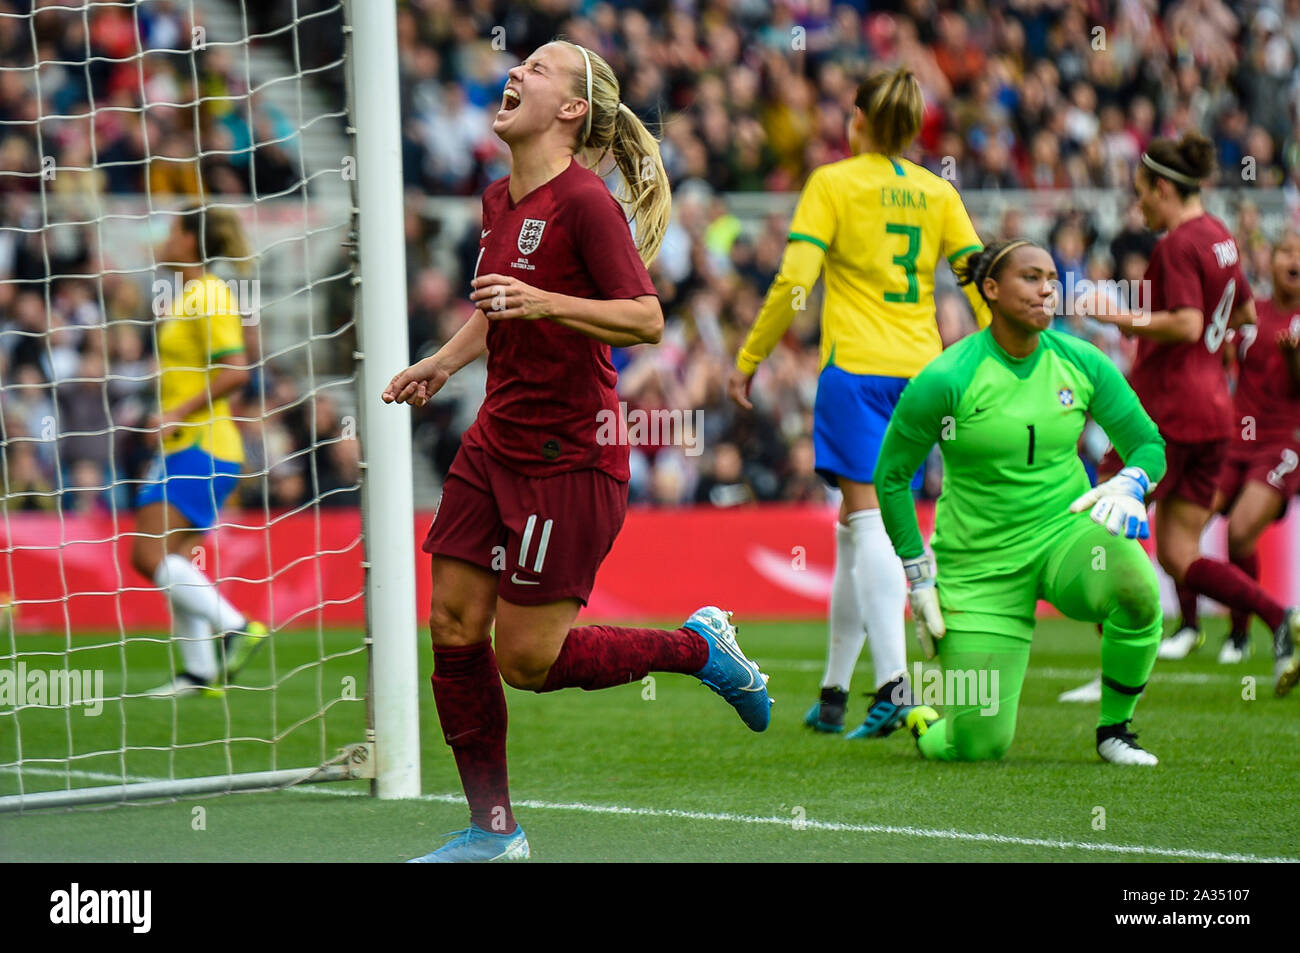 Middlesbrough, UK. 05th Oct, 2019. MIDDLESBROUGH, ENGLAND OCTOBER 5TH Beth Mead of England Women is disappointed as her shot goes wide during the International Friendly match between England Women and Brazil Women at the Riverside Stadium, Middlesbrough on Saturday 5th October 2019.( Credit: Iam Burn | MI News) Photograph may only be used for newspaper and/or magazine editorial purposes, license required for commercial use Credit: MI News & Sport /Alamy Live News Stock Photo